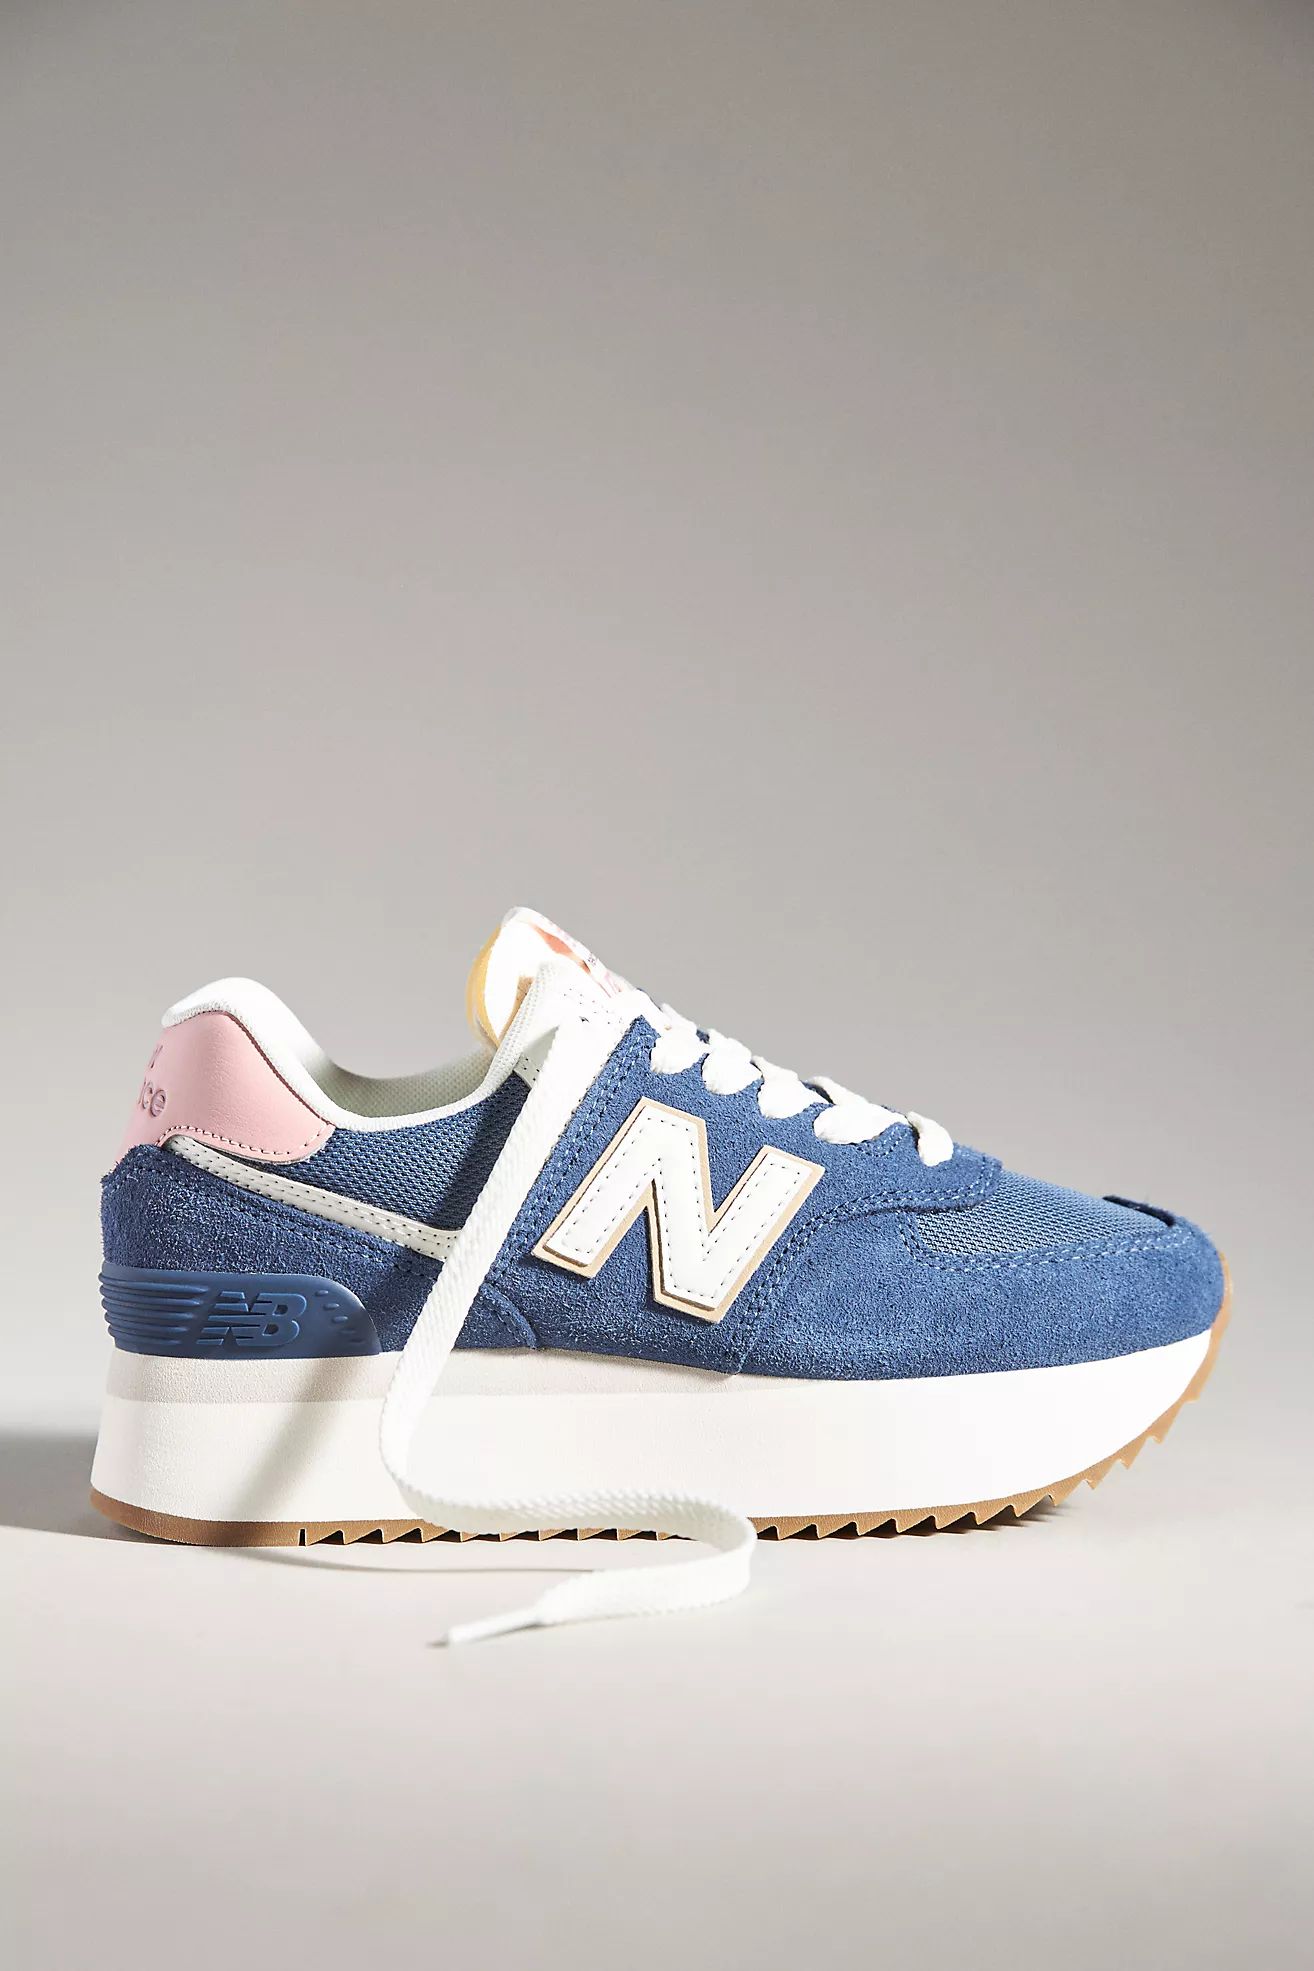 New Balance 574+ Sneakers | Anthropologie (US)